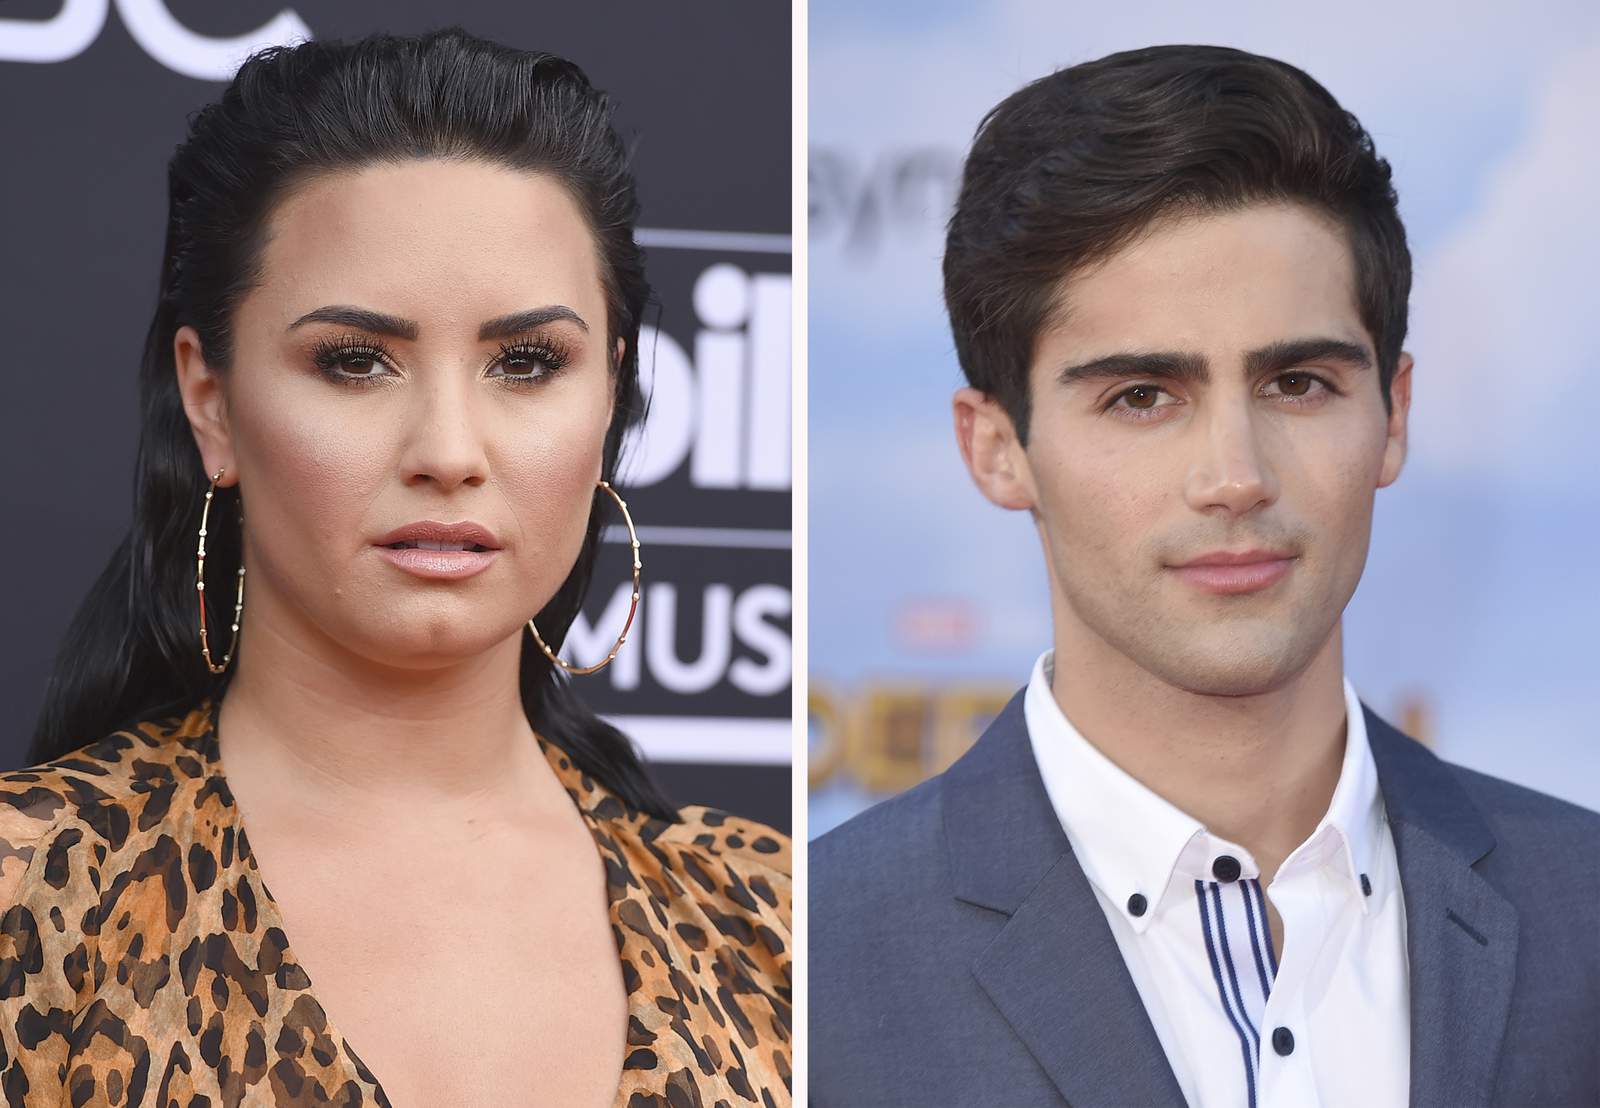 Demi Lovato, Max Ehrich call off engagement after 2 months